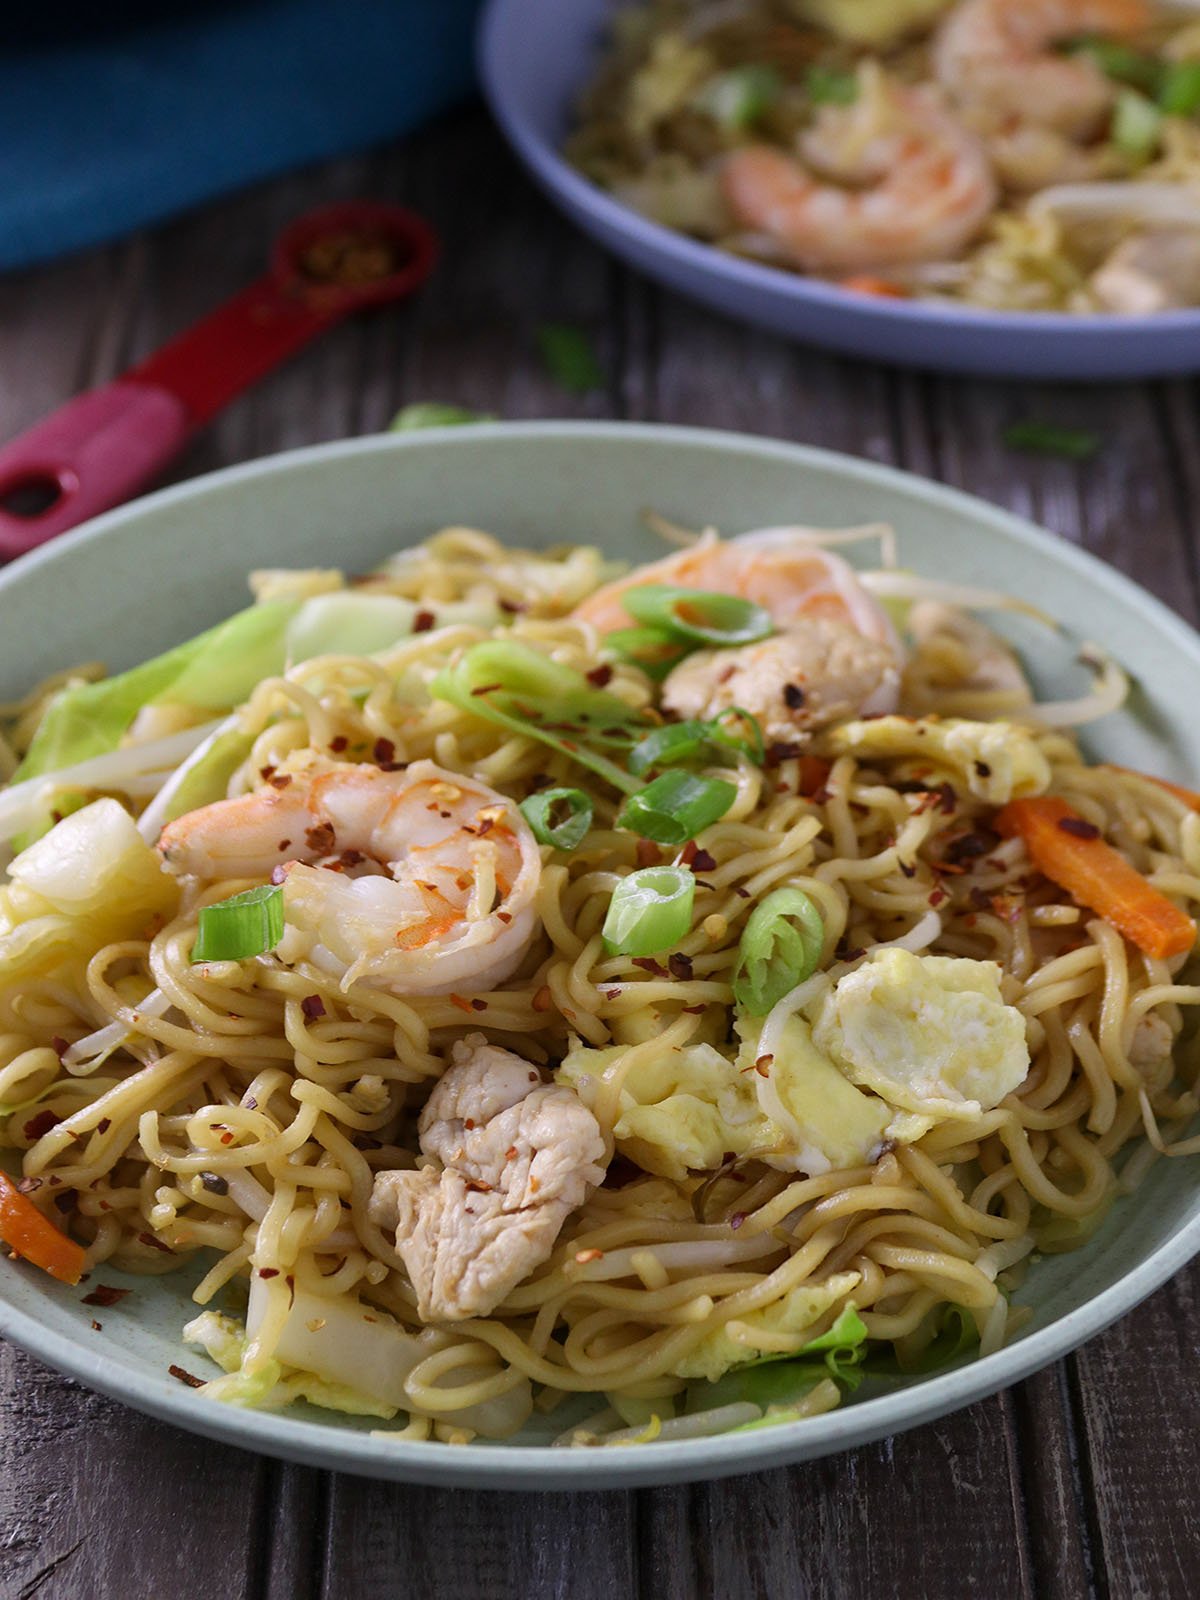 Spicy dragon noodles made of ramen, shrimp, chicken, and vegetables in a white serving bowl